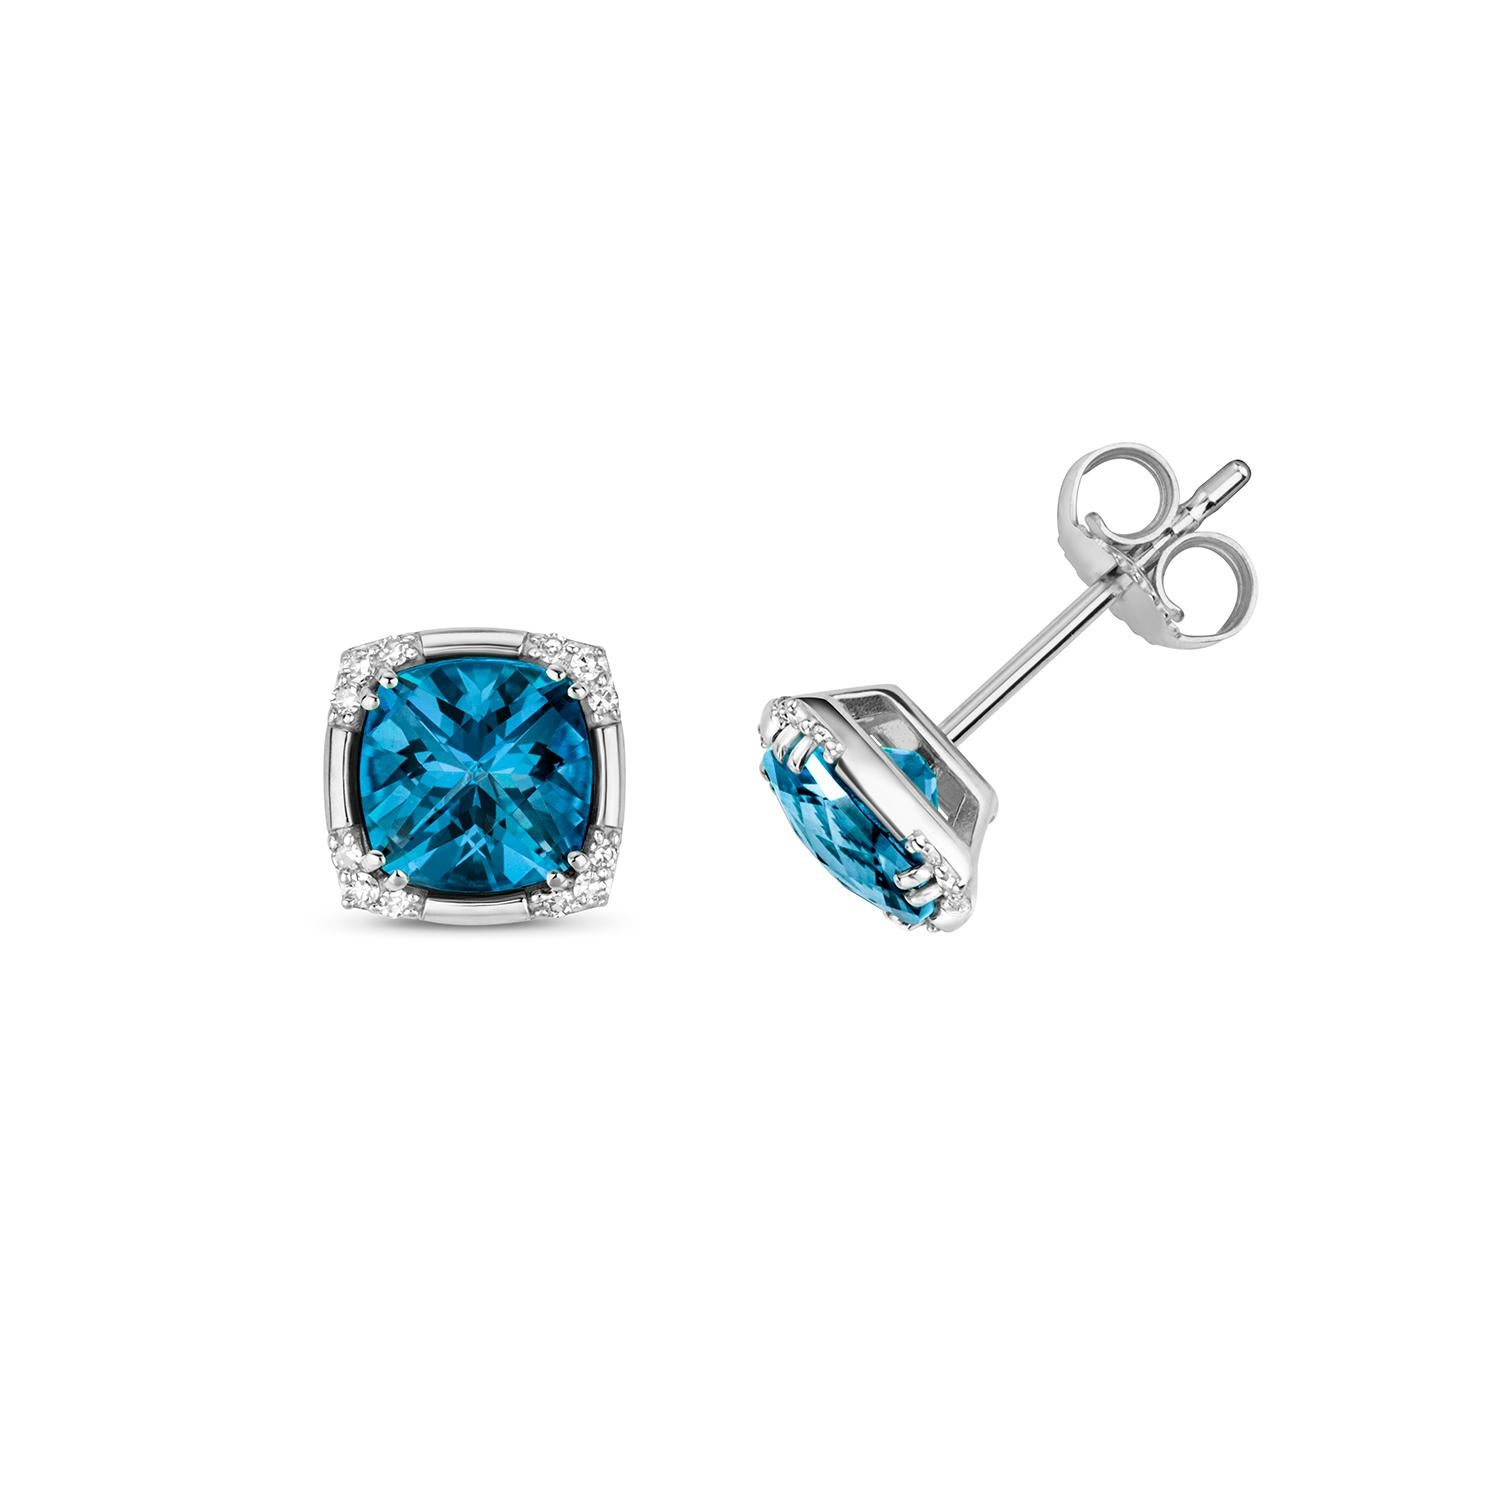 DIAMOND & CU LONDON BLUE TOPAZ STUDS

9CT W/G SC/0.04CT LBT/2.14CT

Weight: 1.2g

Number Of Stones:2+24

Total Carates:2.140+0.060